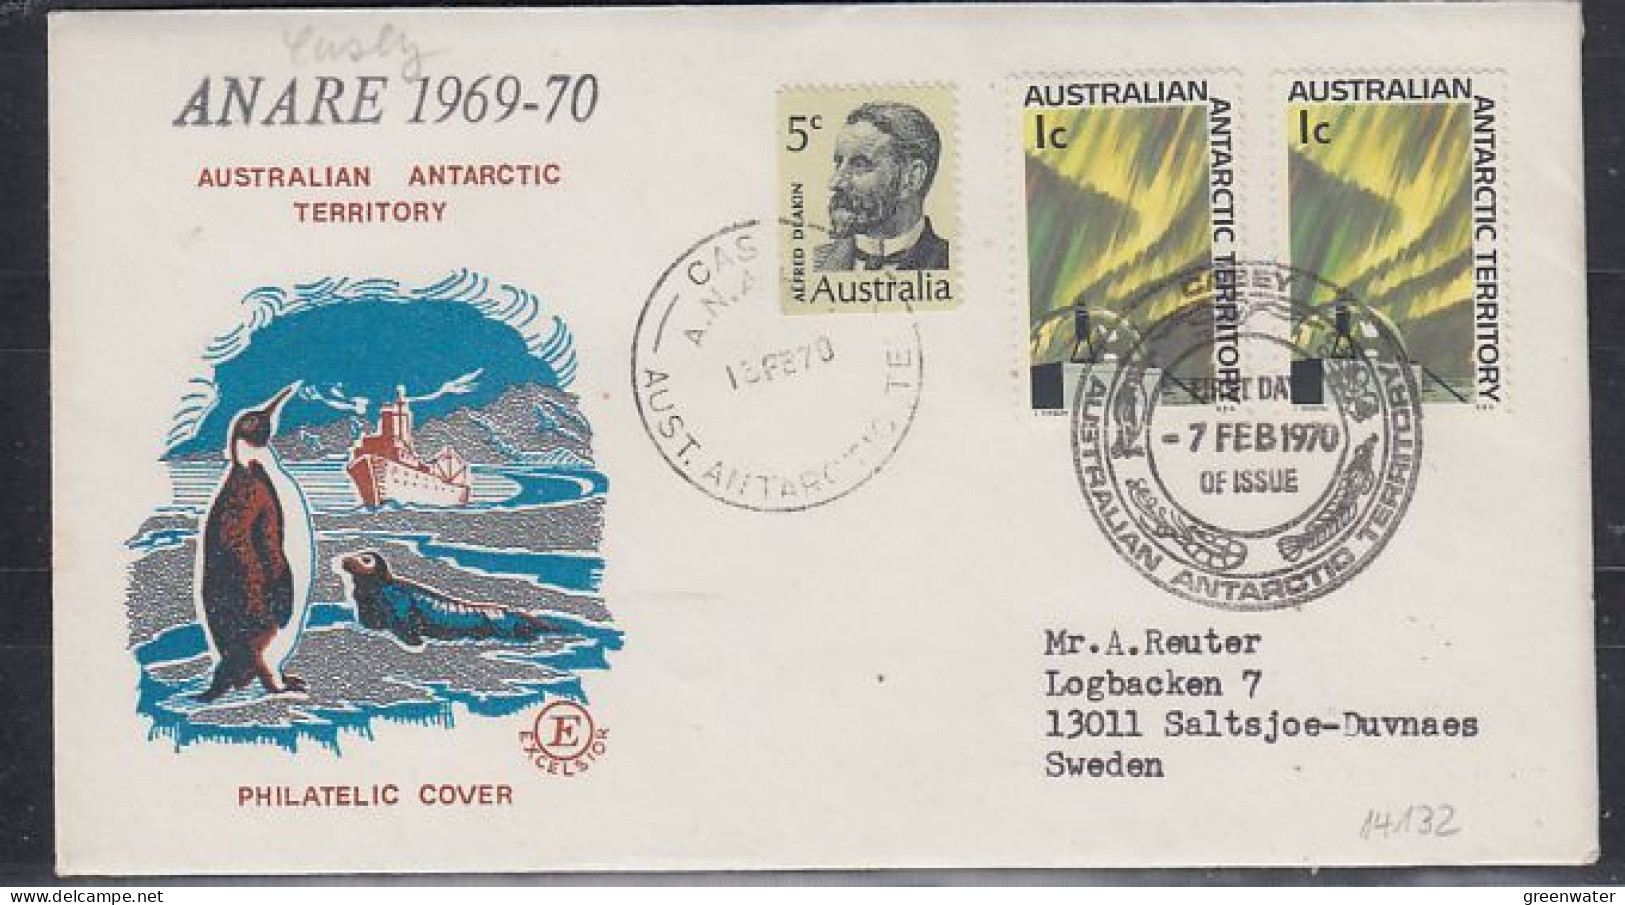 AAT Anare 1969-1970 Ca Casey  13 FEB 1970 (59774) - Covers & Documents